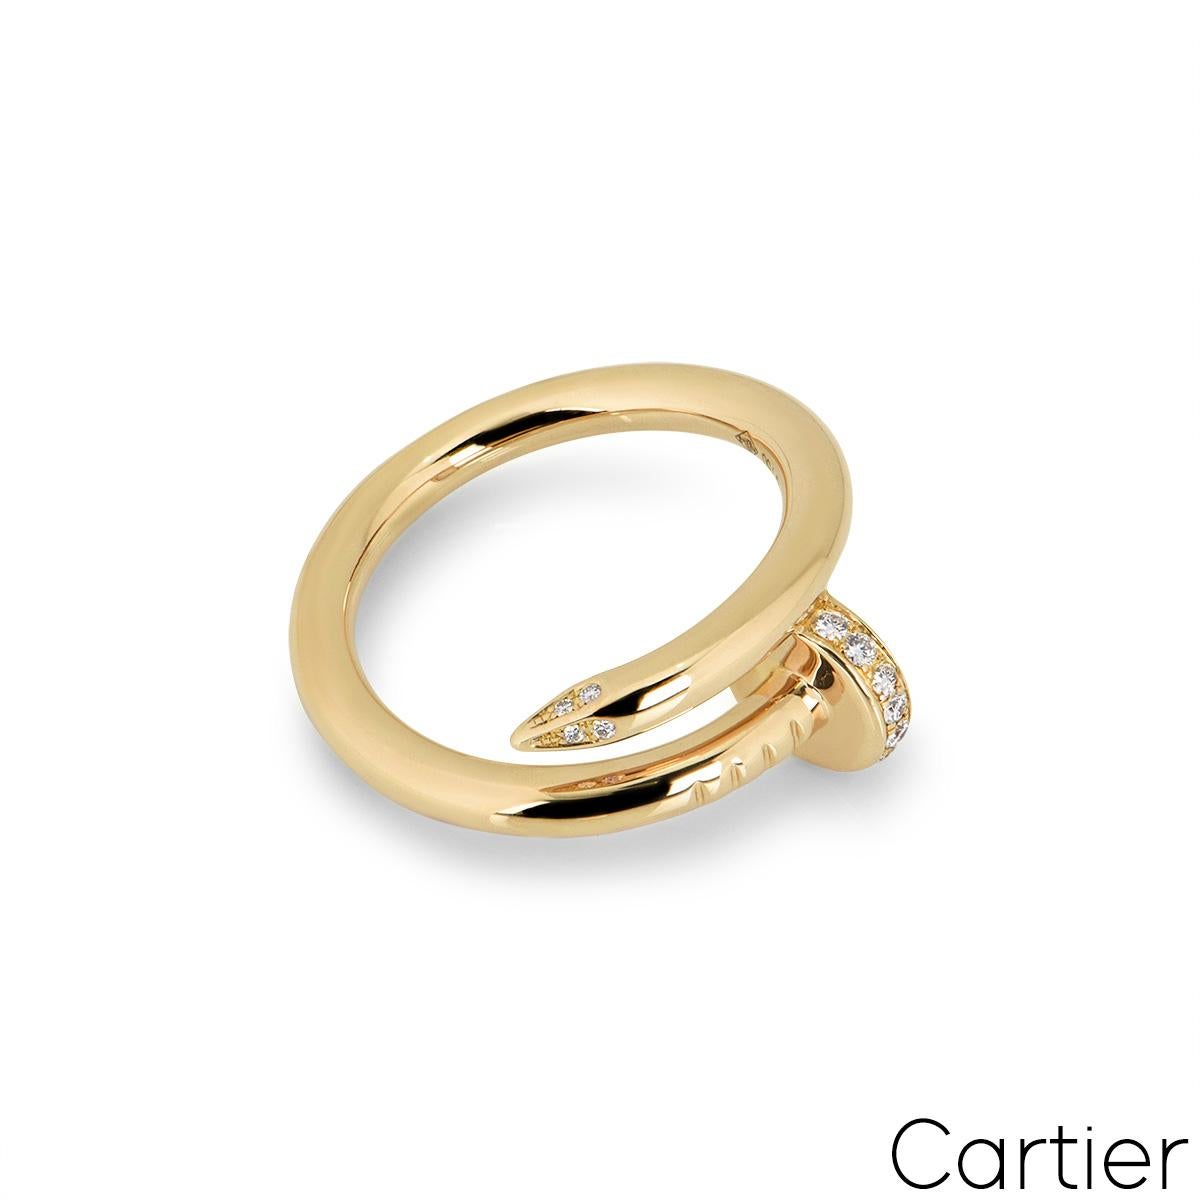 Cartier Yellow Gold Diamond Juste Un Clou Ring Size 48 B4216900 In Excellent Condition For Sale In London, GB